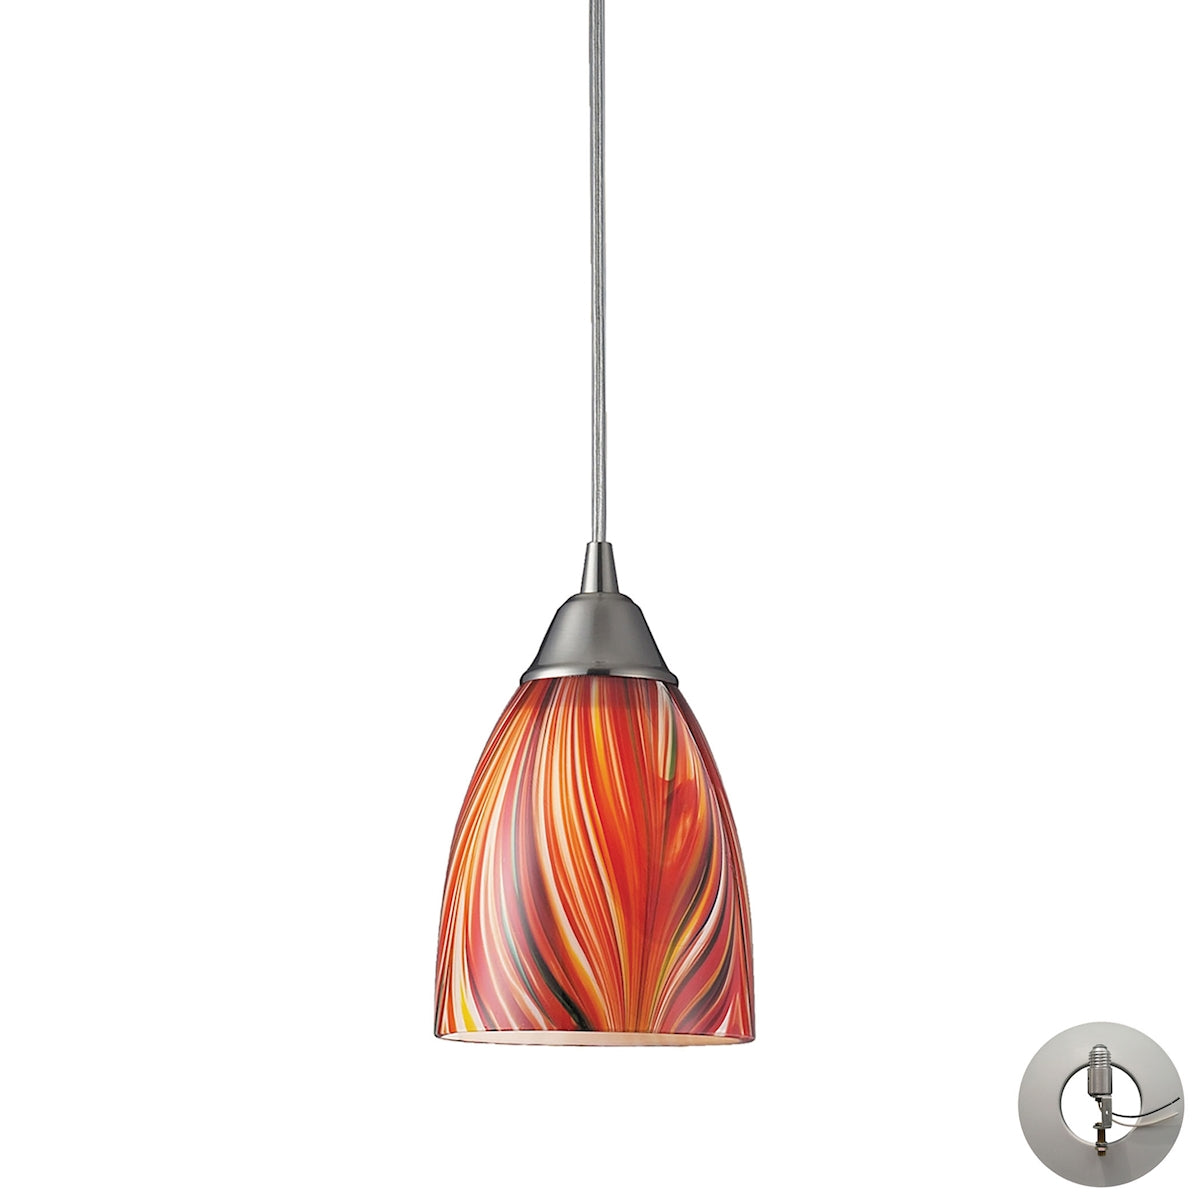 Arco Baleno 1-Light Mini Pendant in Satin Nickel with Multi-colored Glass - Includes Adapter Kit